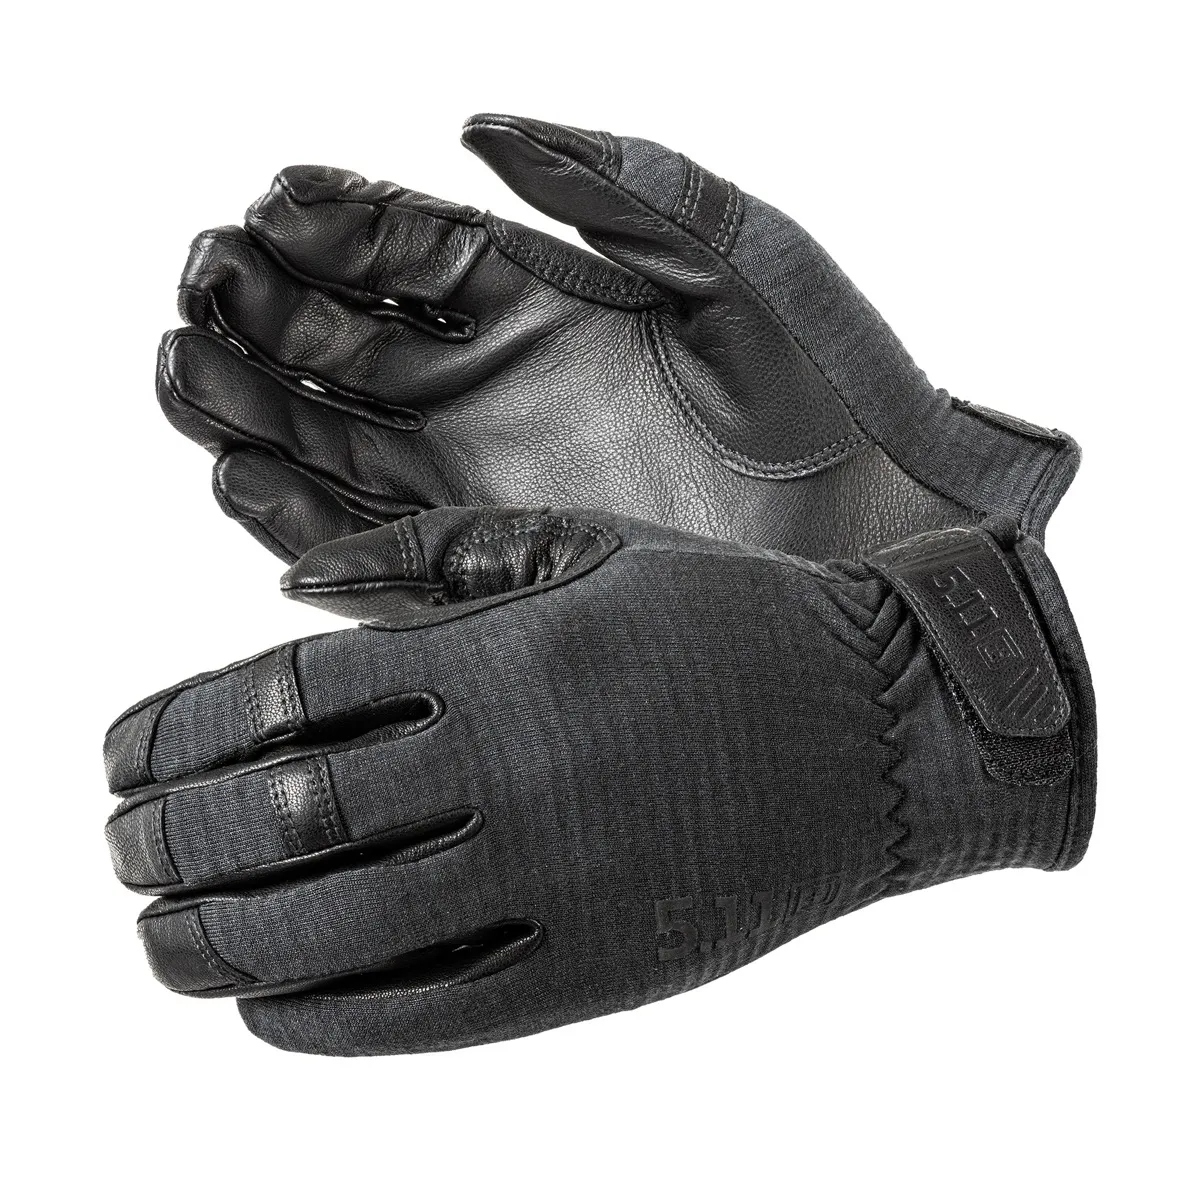 New Adaptable Gloves and EDC Blades In 5.11's 2023 Fall EDC Line